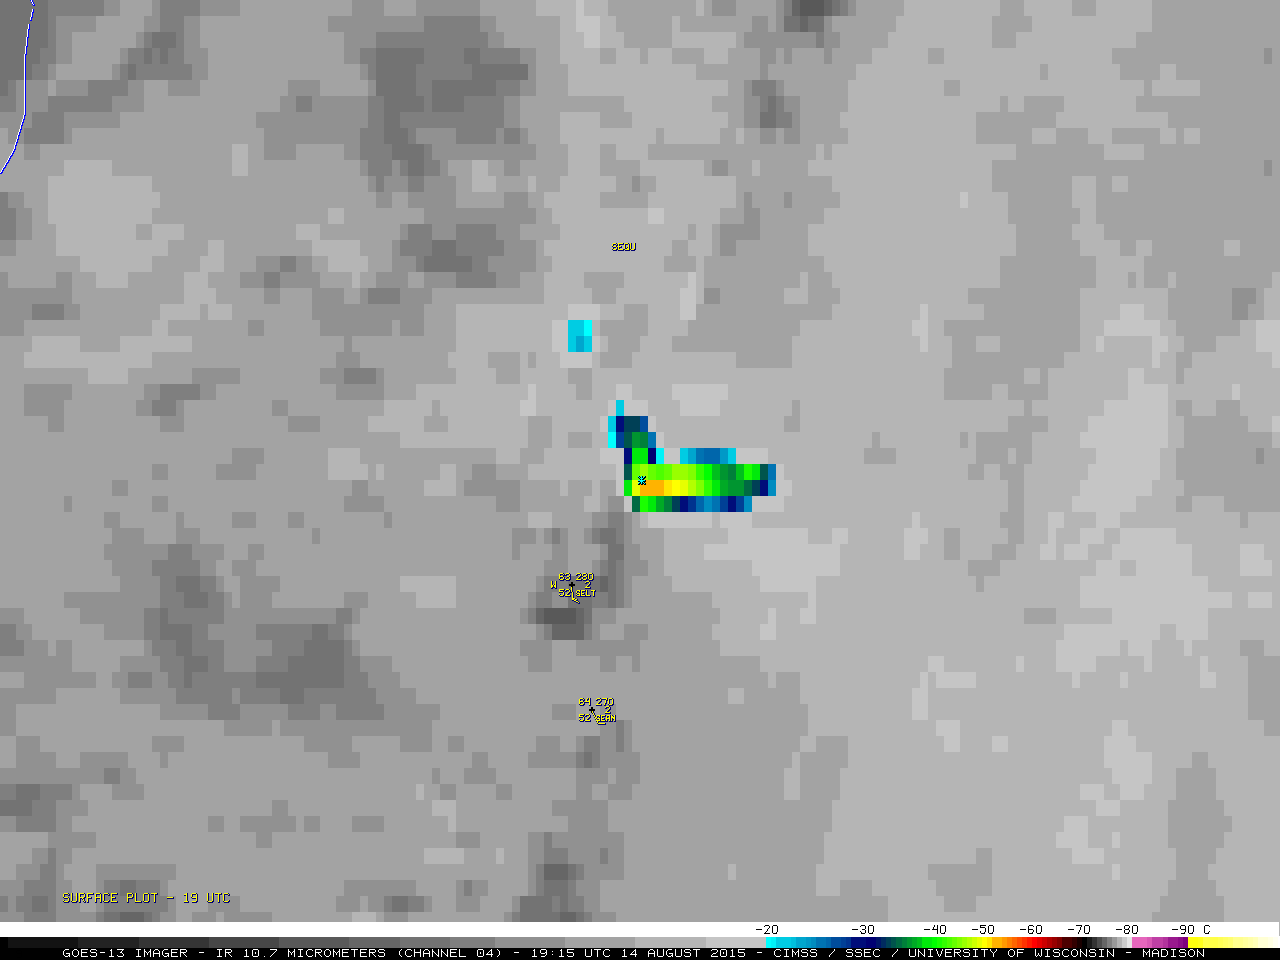 GOES-13 infrared (10.7 µm) images [click to play animation]